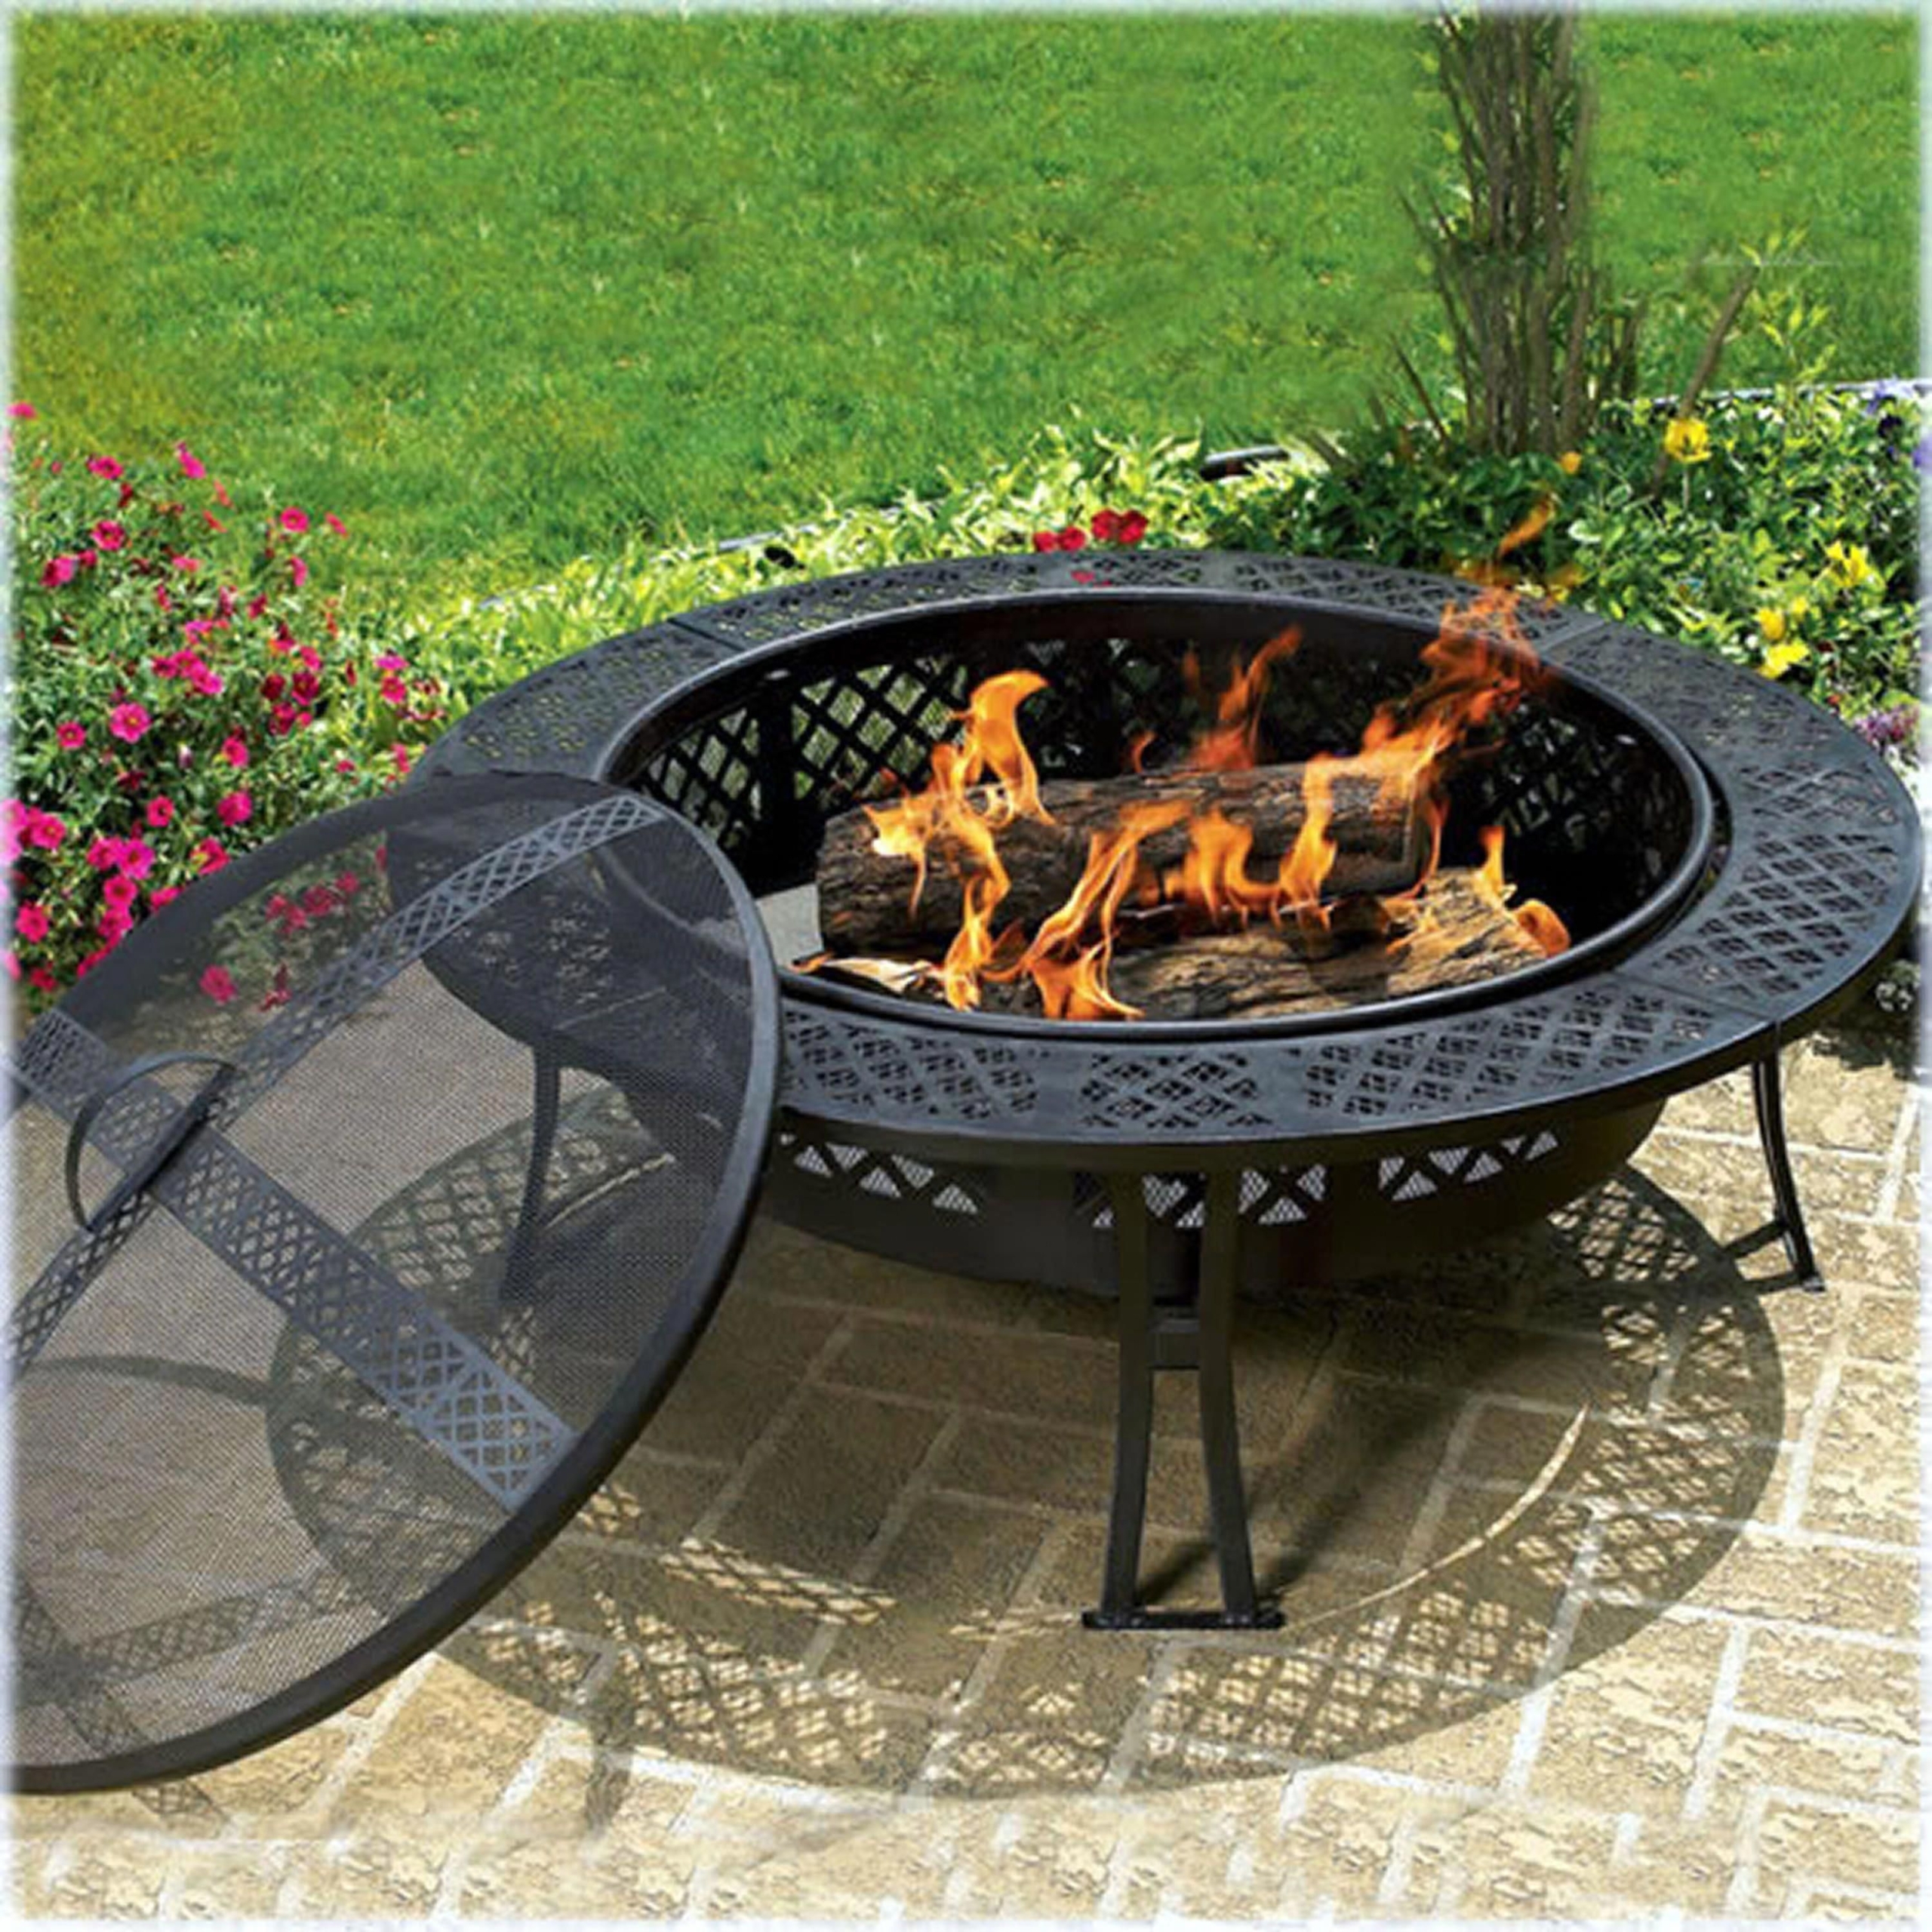 Wood Burning Fire Pit Table Visualhunt, Wood Burning Fire Pit Table And Chairs